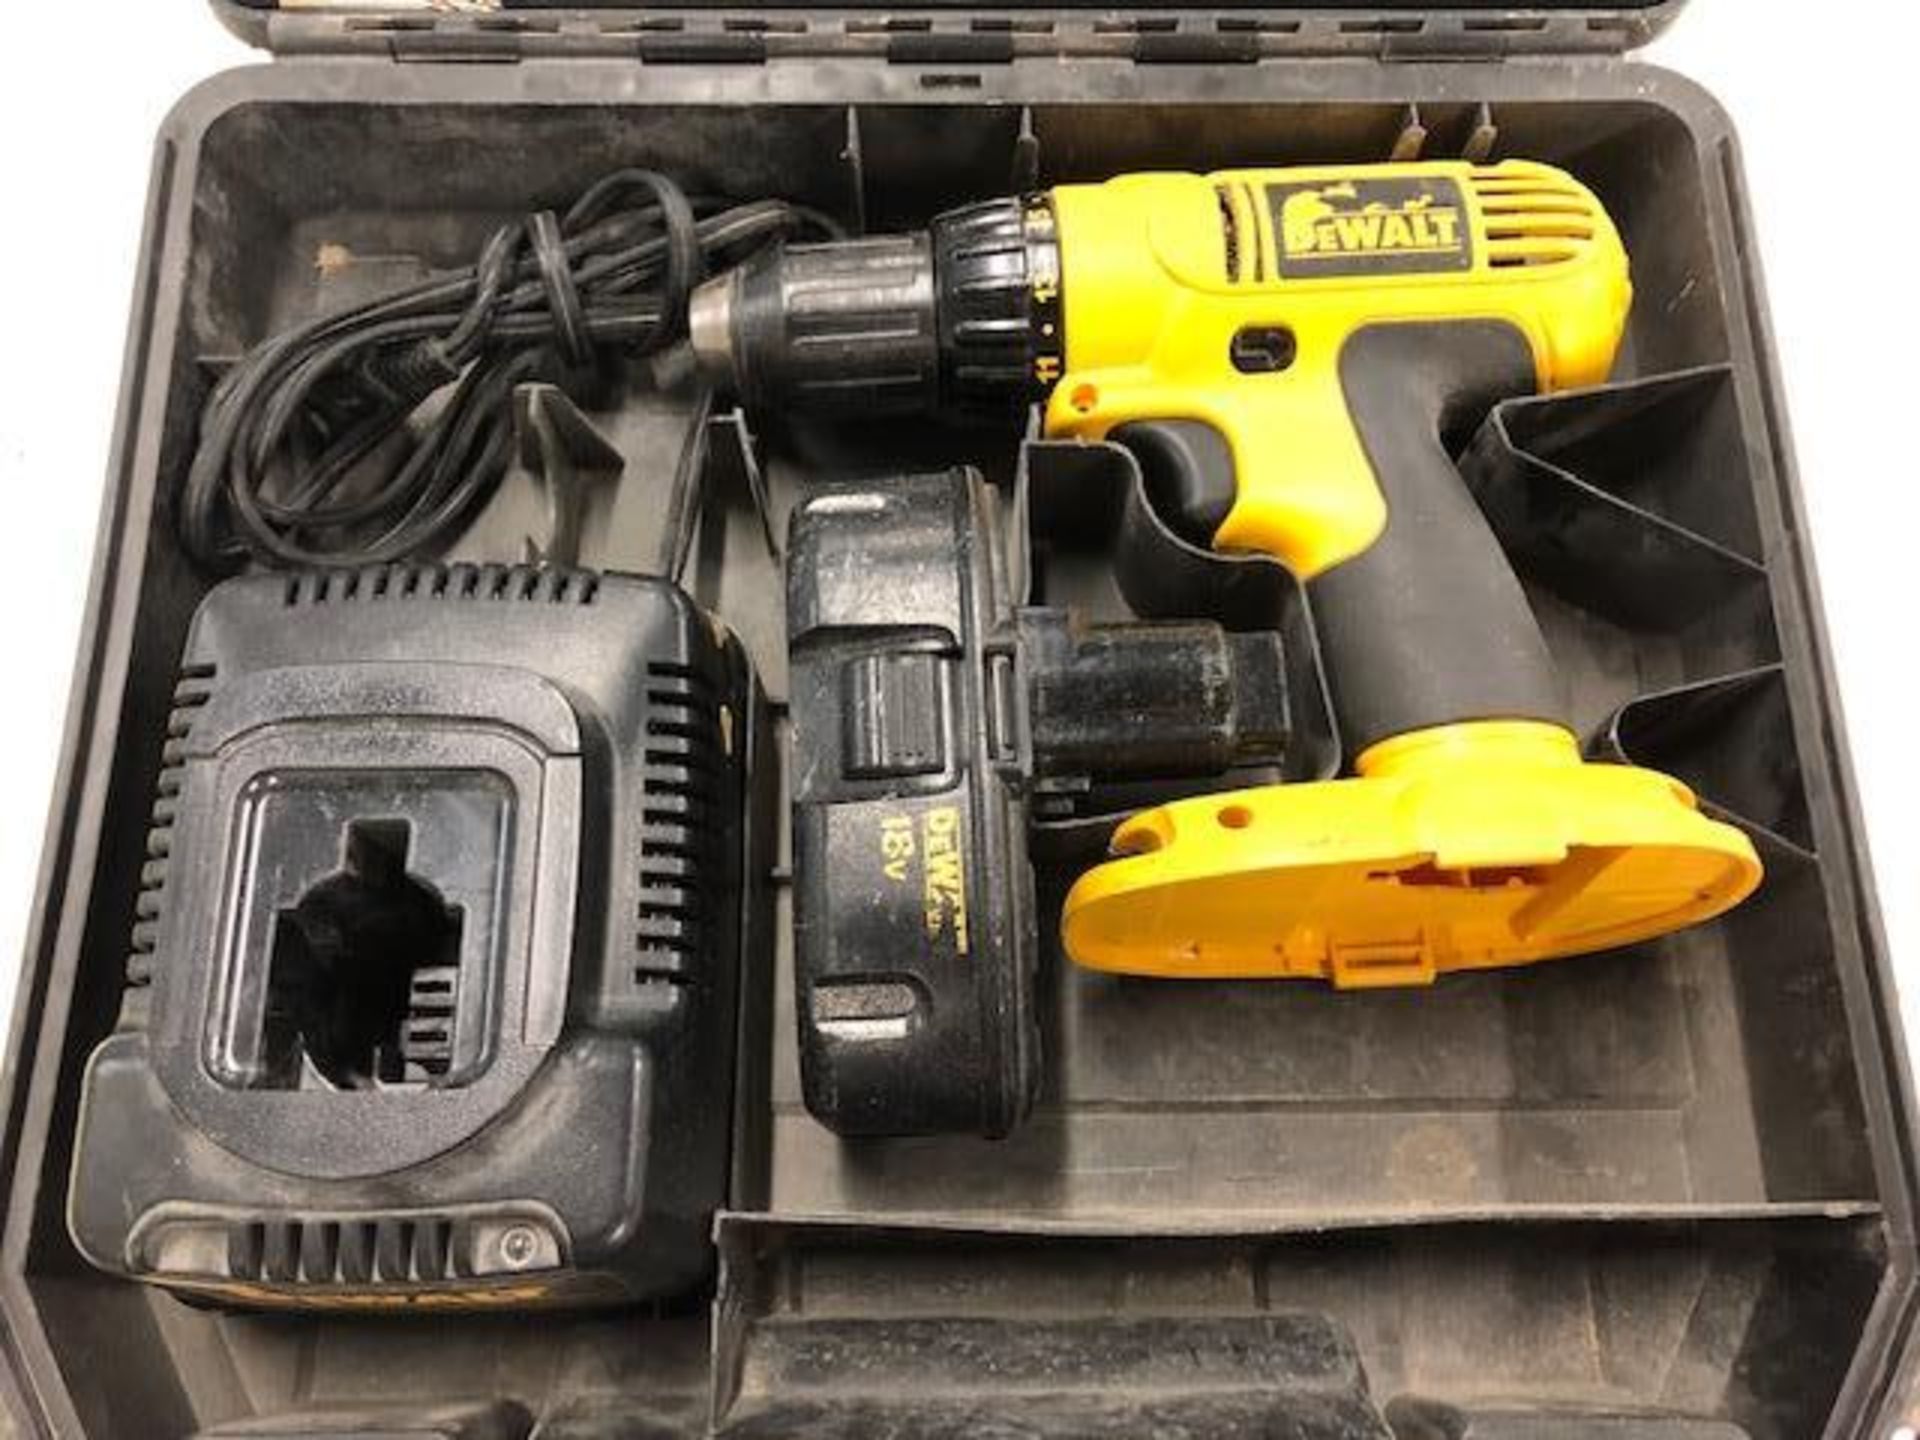 DEWALT, DC759 18V BATTERY POWERED DRILL WITH CHARGER - Image 2 of 4